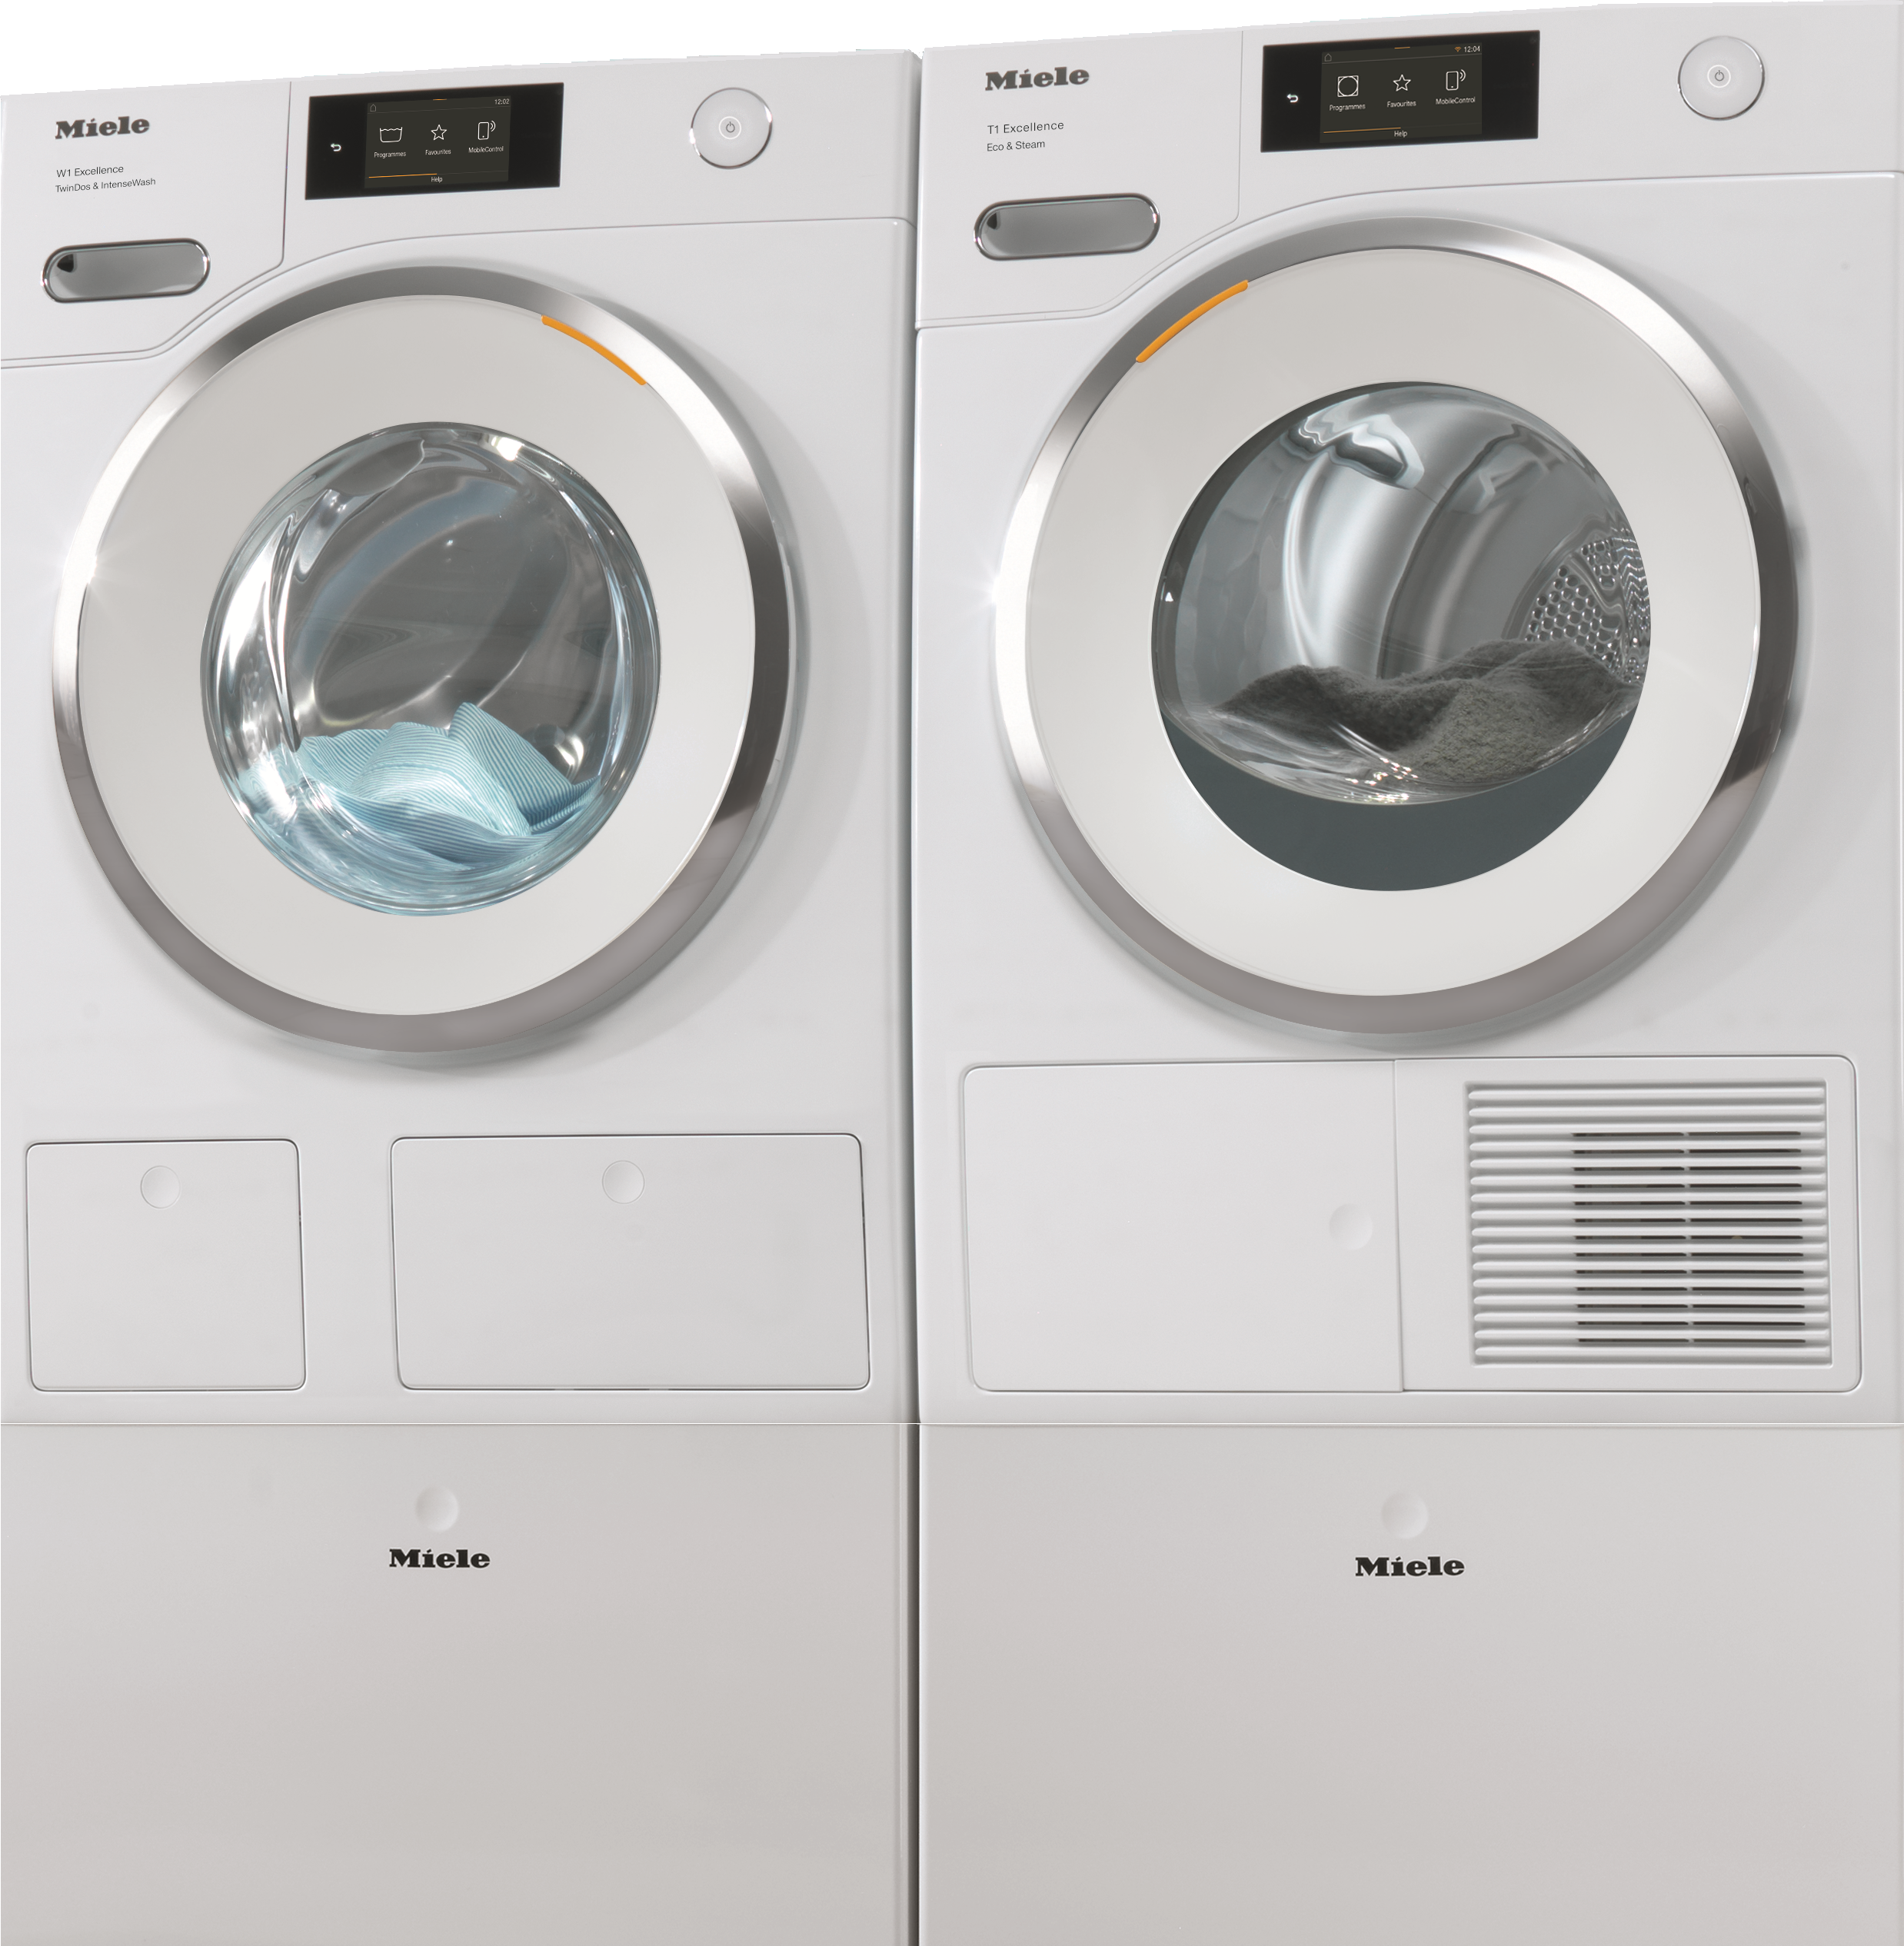 Miele Front Load Washer & Dryer Set MIWADREW18